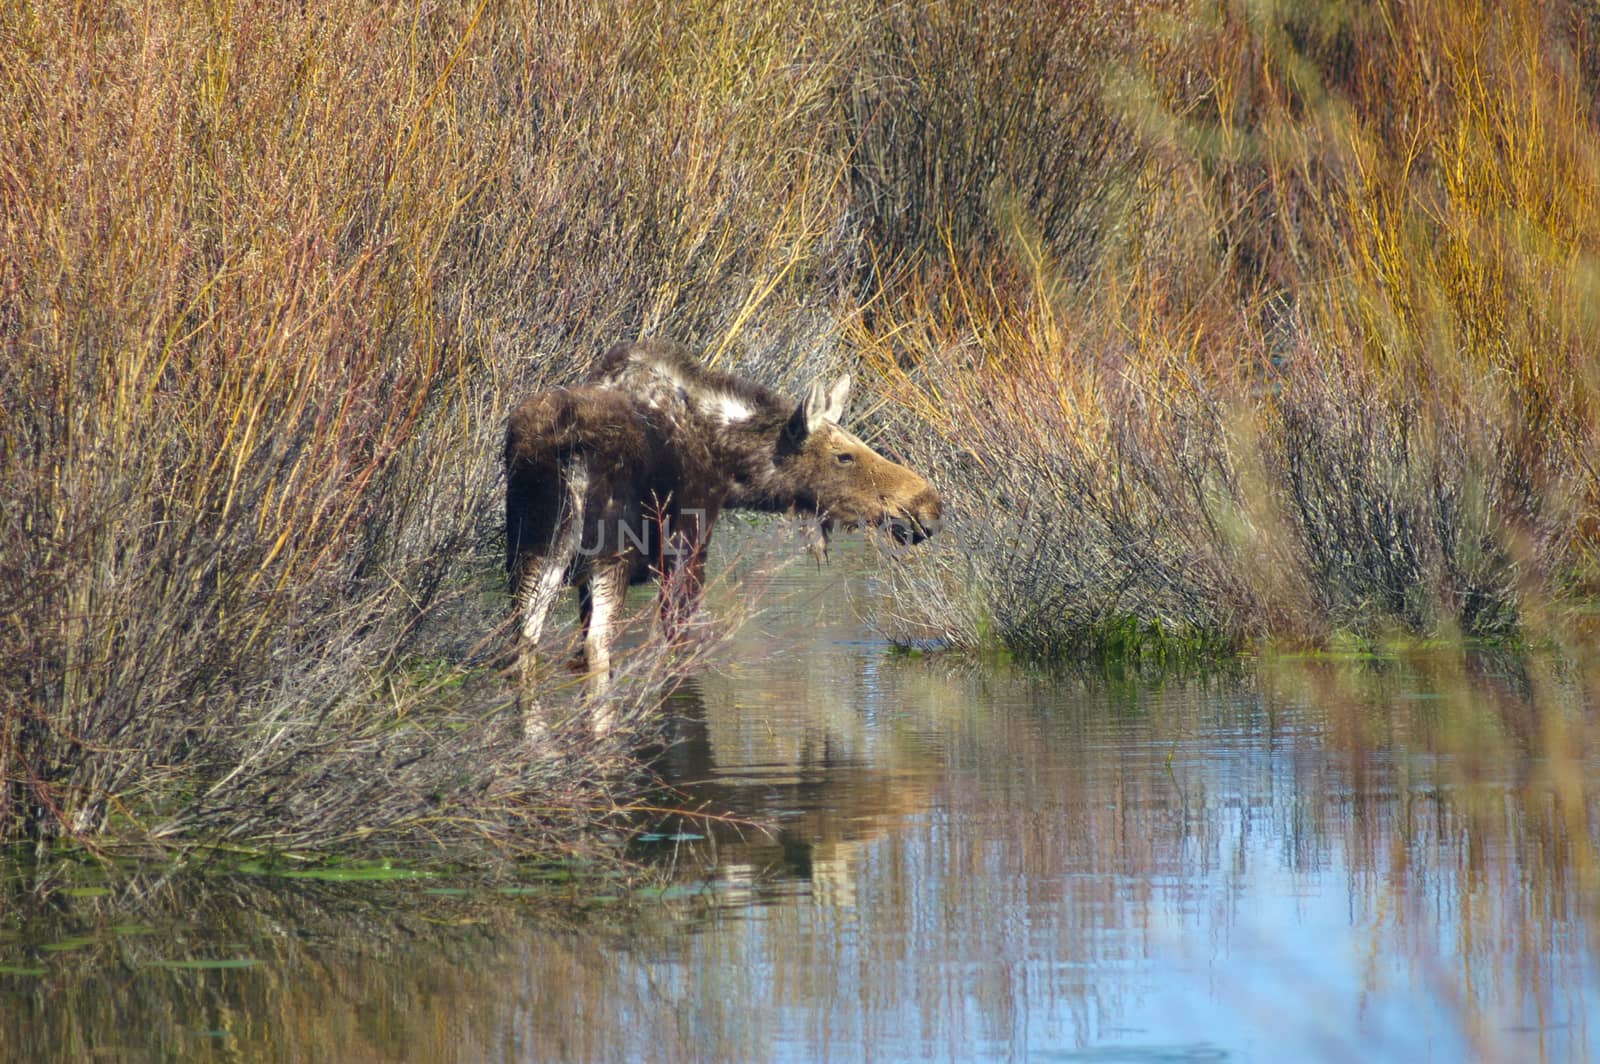 Moose in water in Grand Tetons National Park